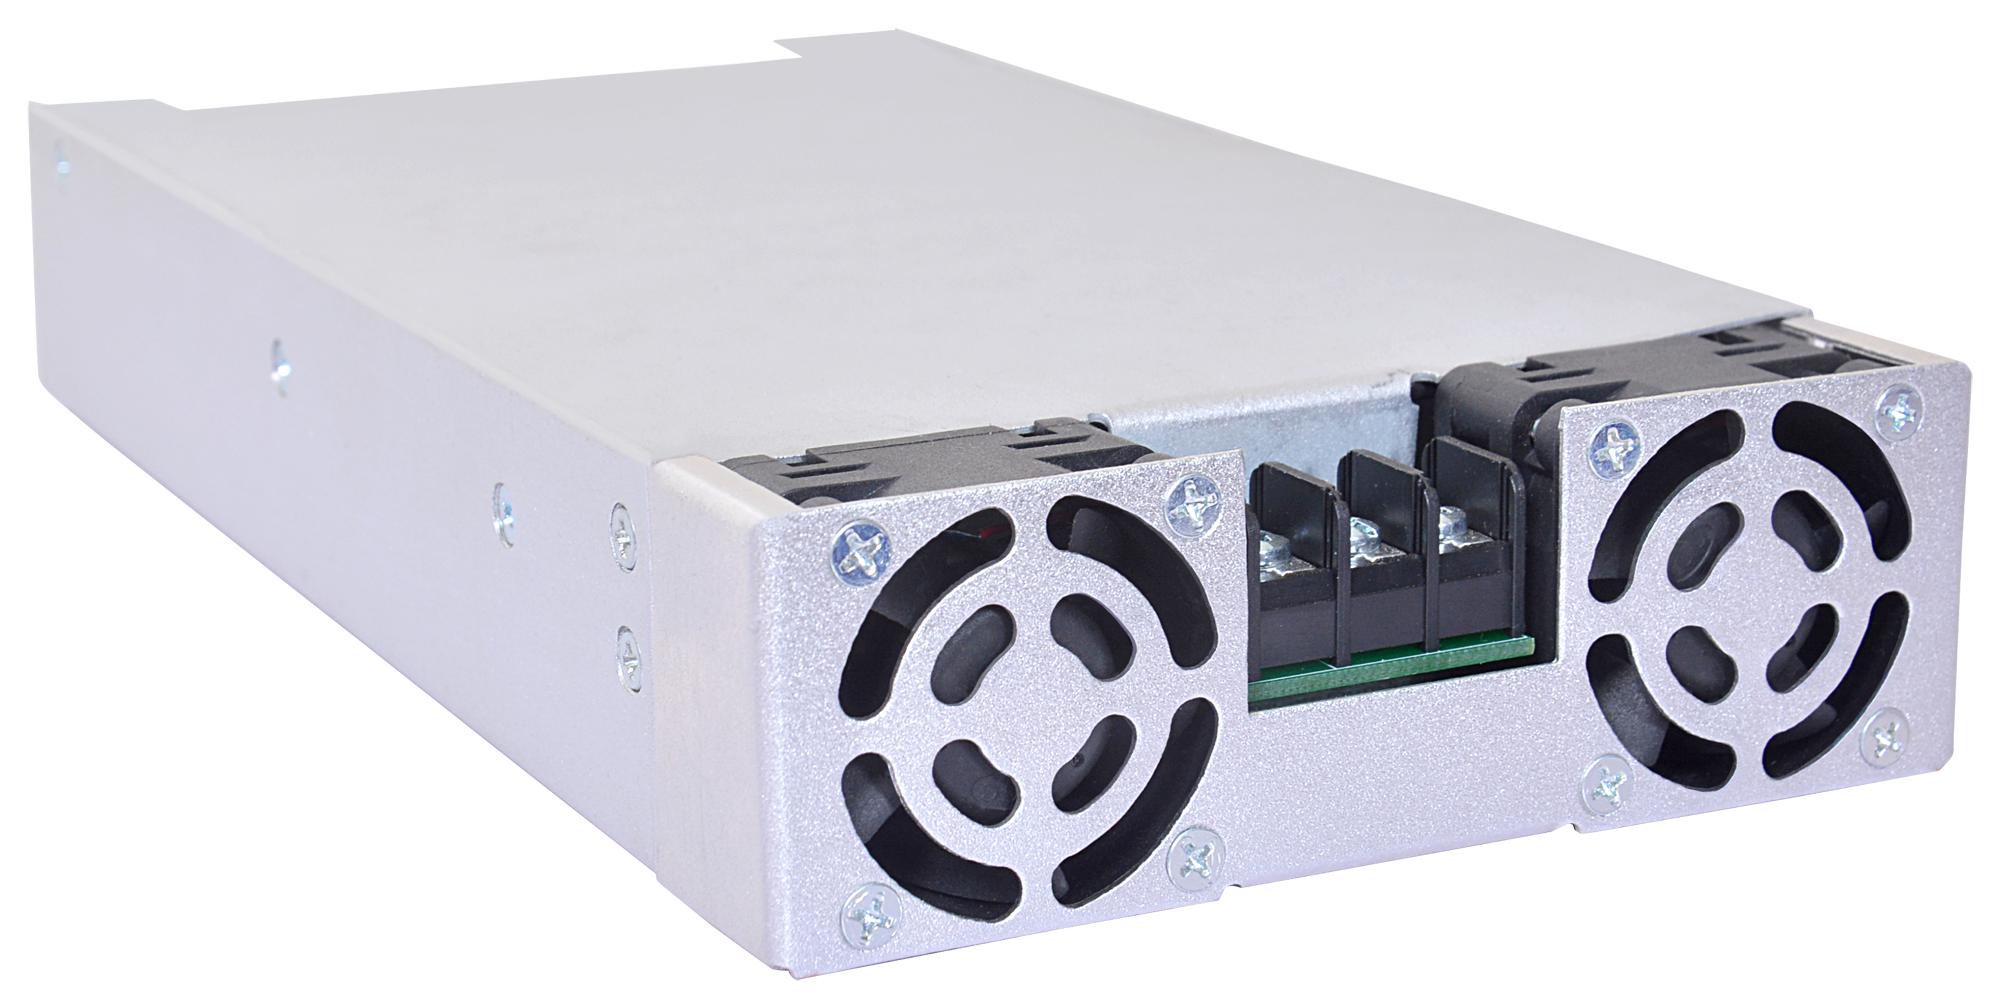 MBE1000-1T12 POWER SUPPLY, AC-DC, 12V, 41.67A BEL POWER SOLUTIONS